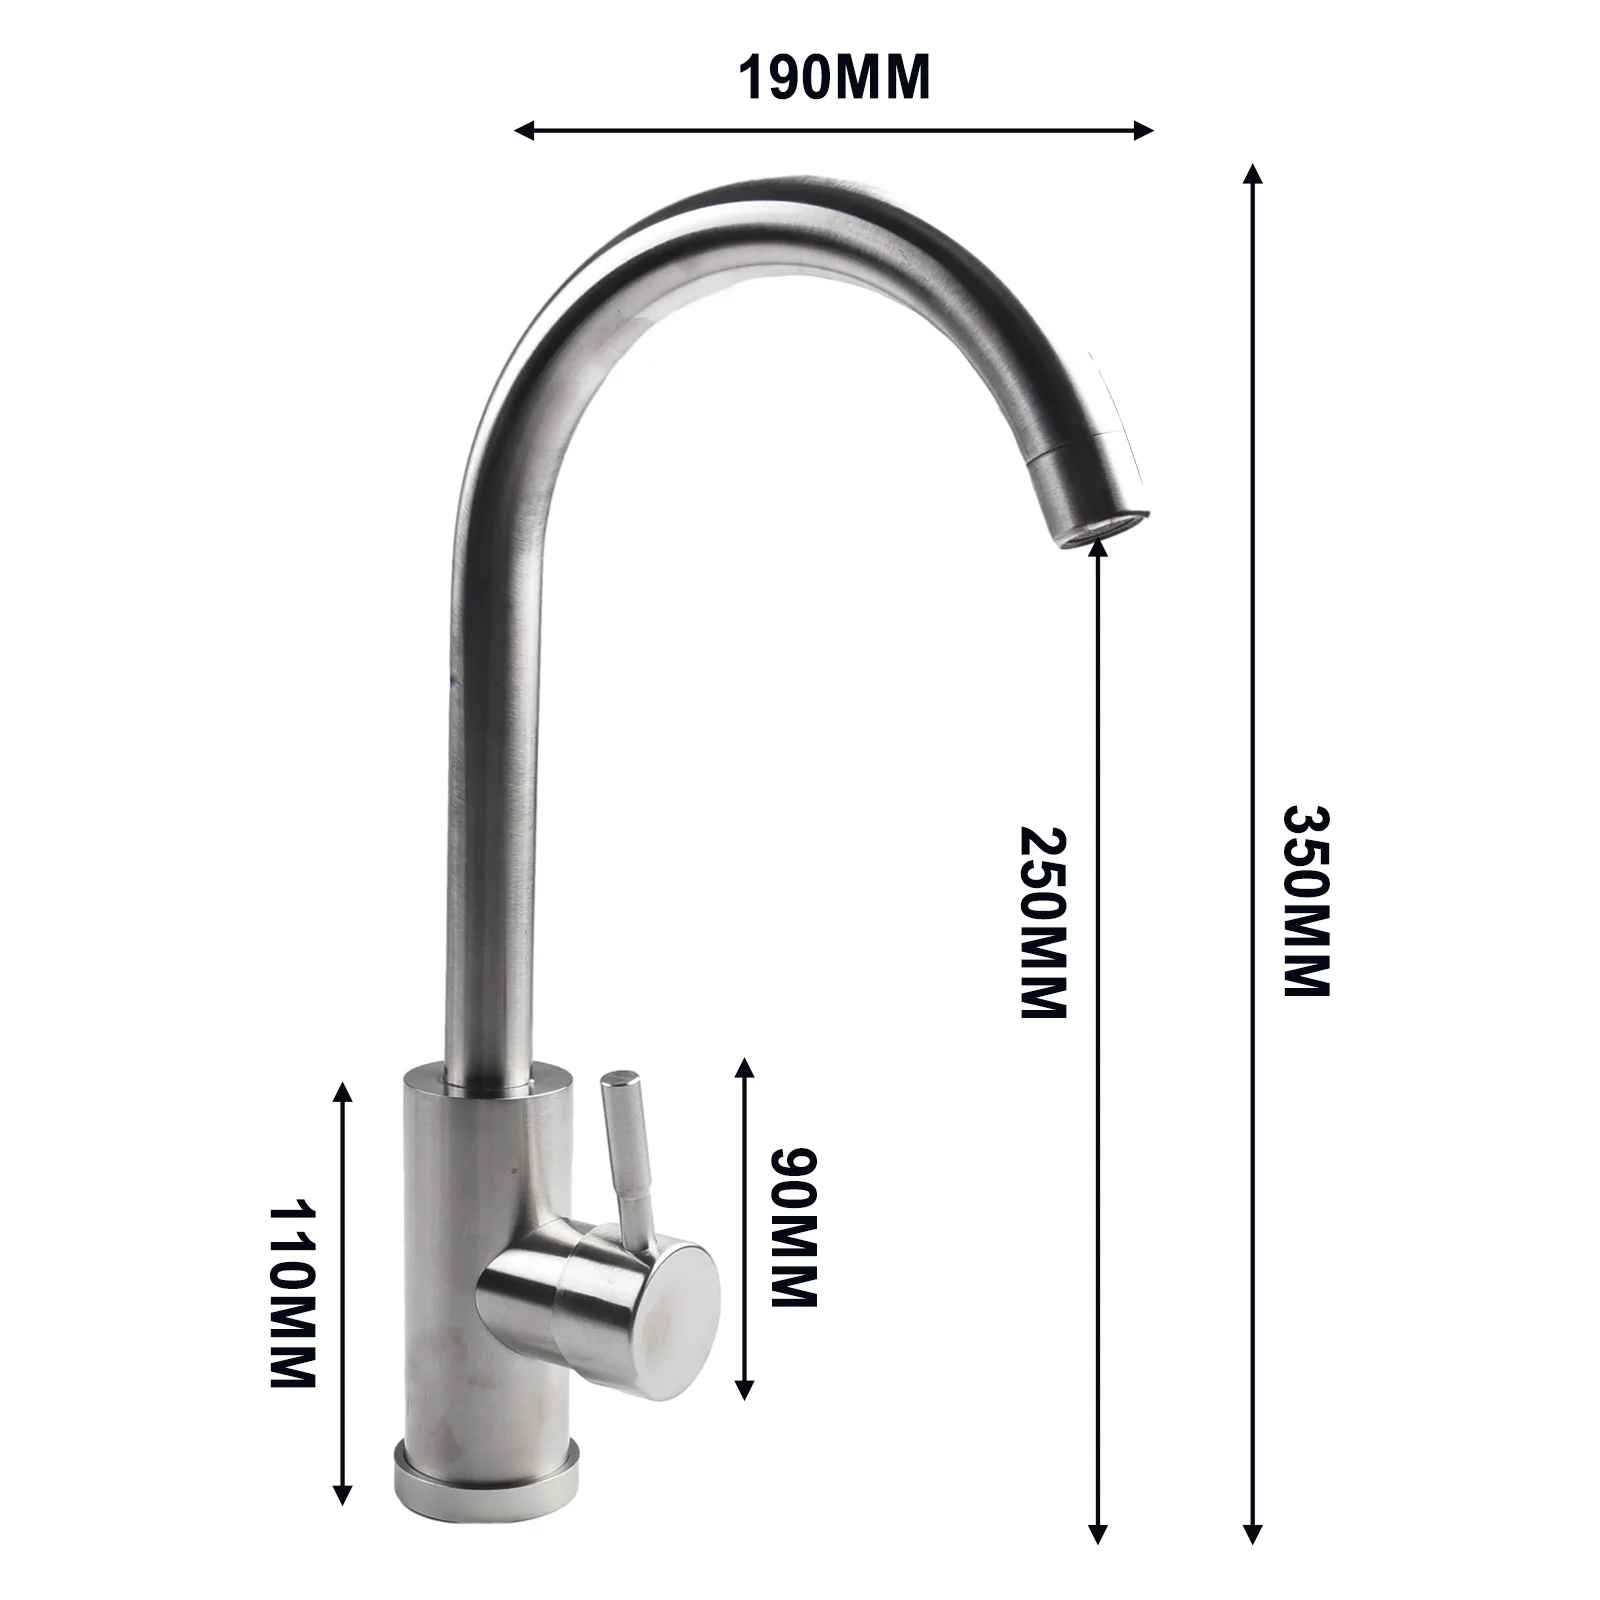 

Kitchen Faucet Cold And Hot Mixer Tap 304 Stainless Steel 360 ° Free Rotation Water Tap Deck Mounted Bathtub Sink Faucet